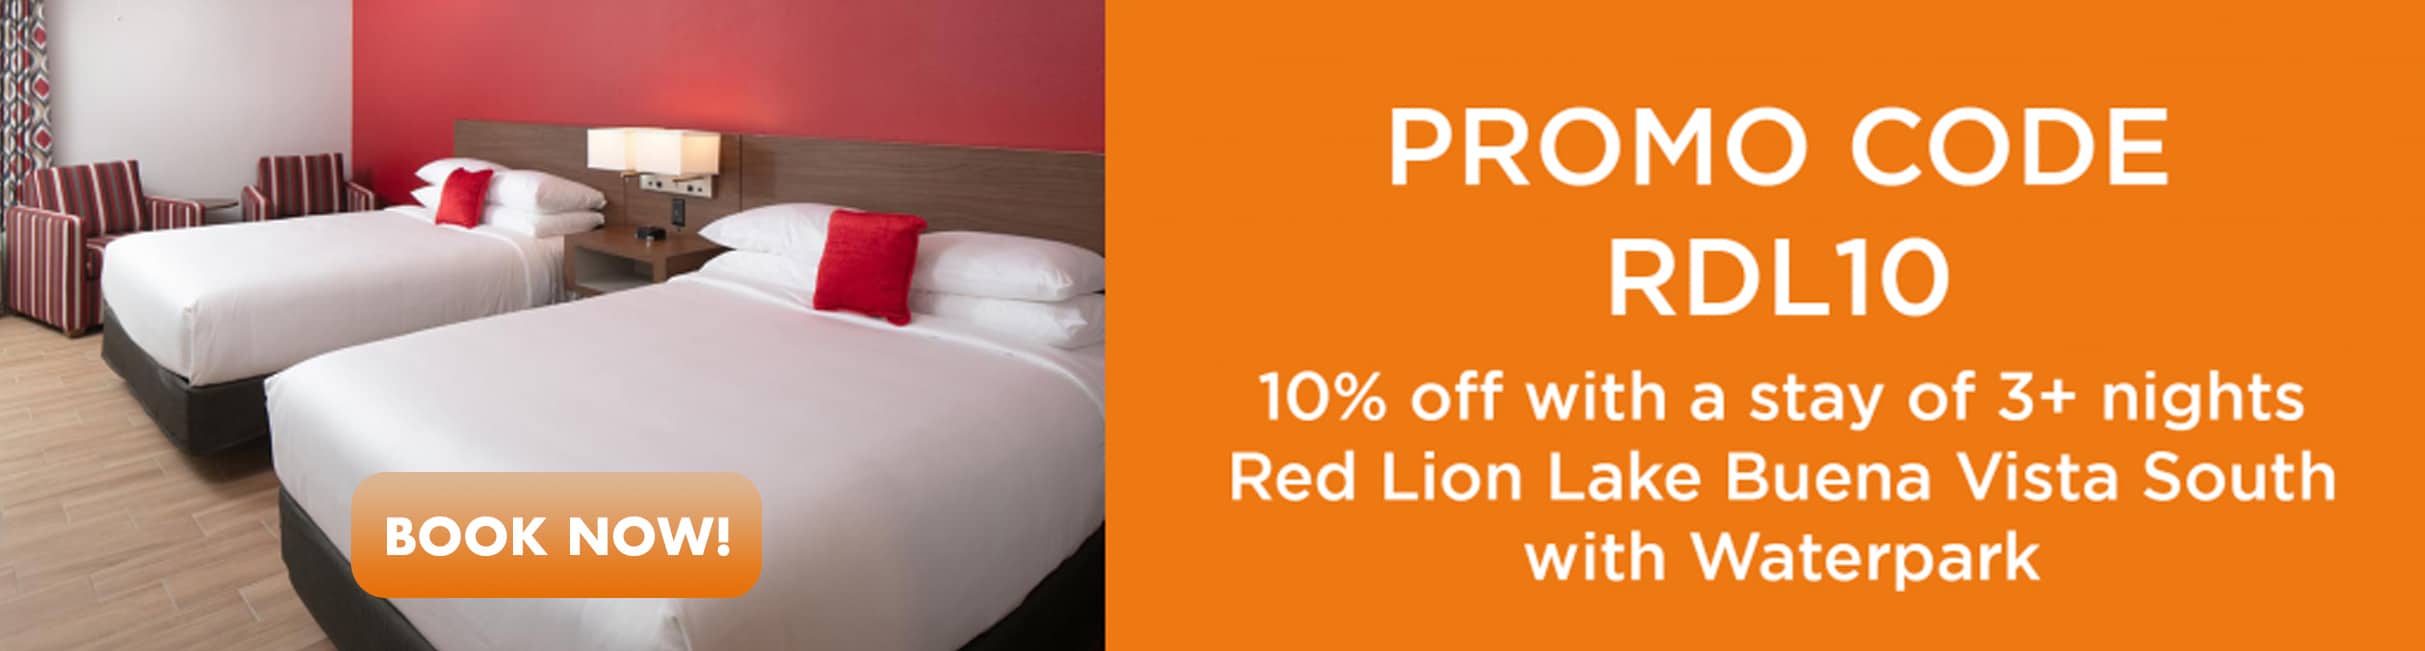 Promo Red Lion 10% off Orlando Vacation Discounts